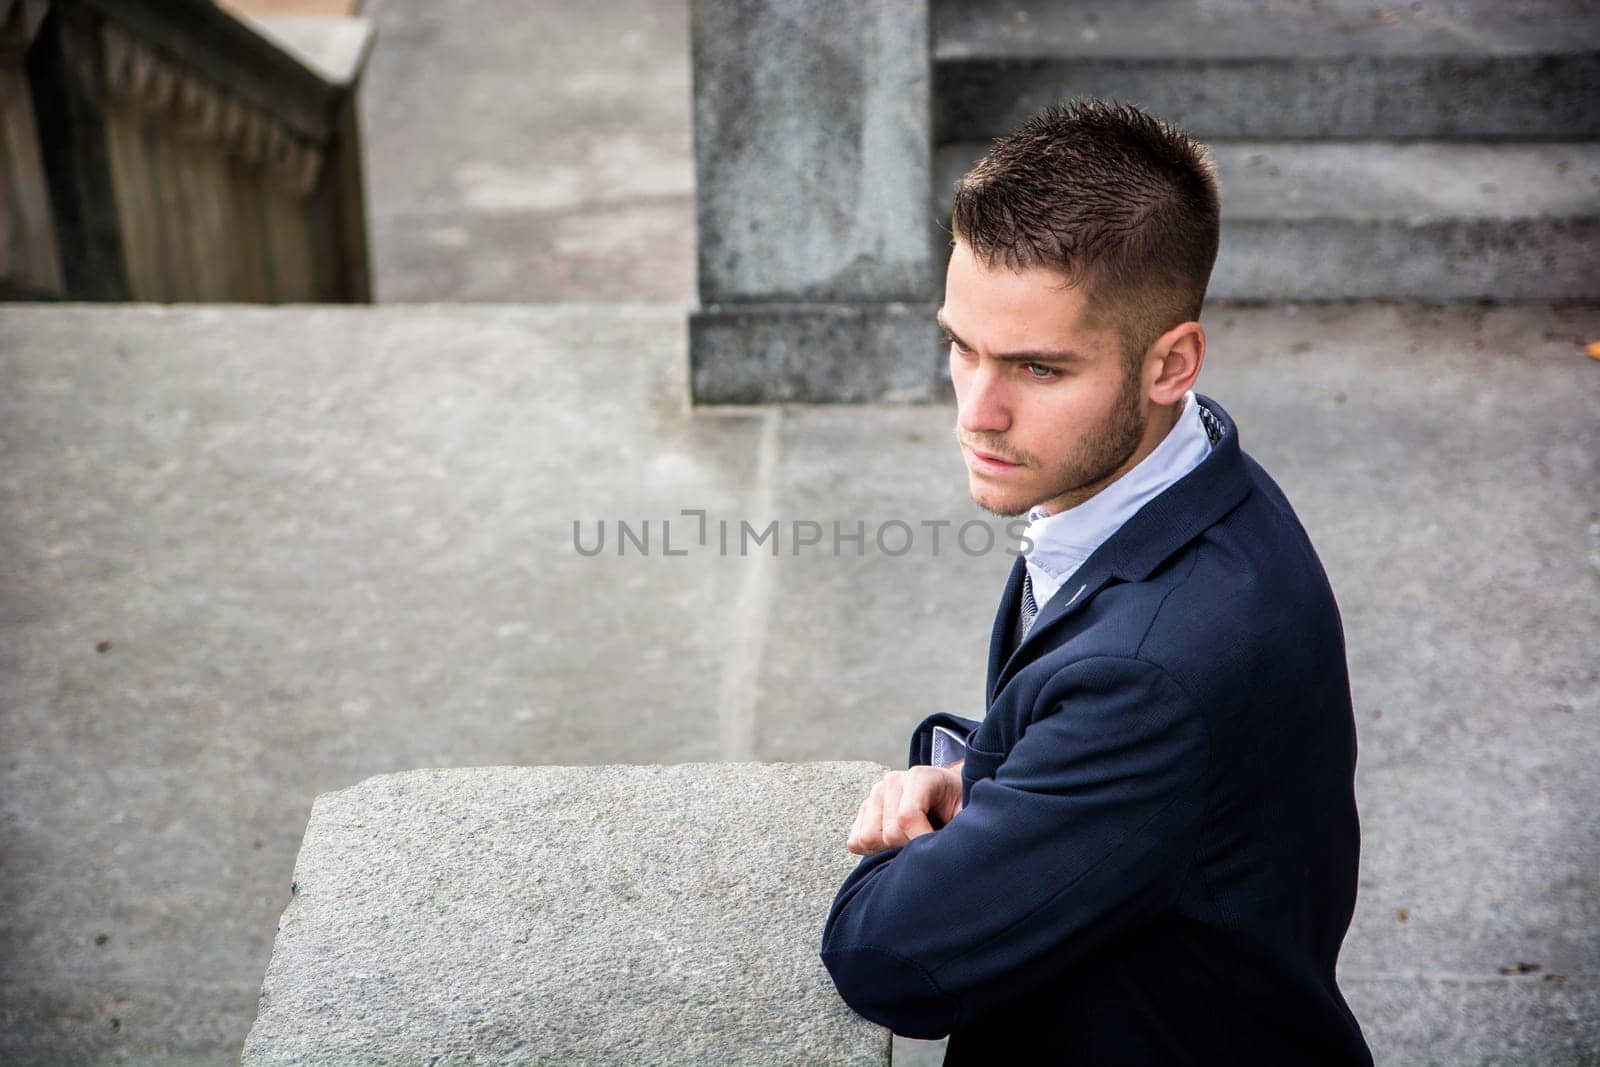 A man in a suit leaning against a stone wall